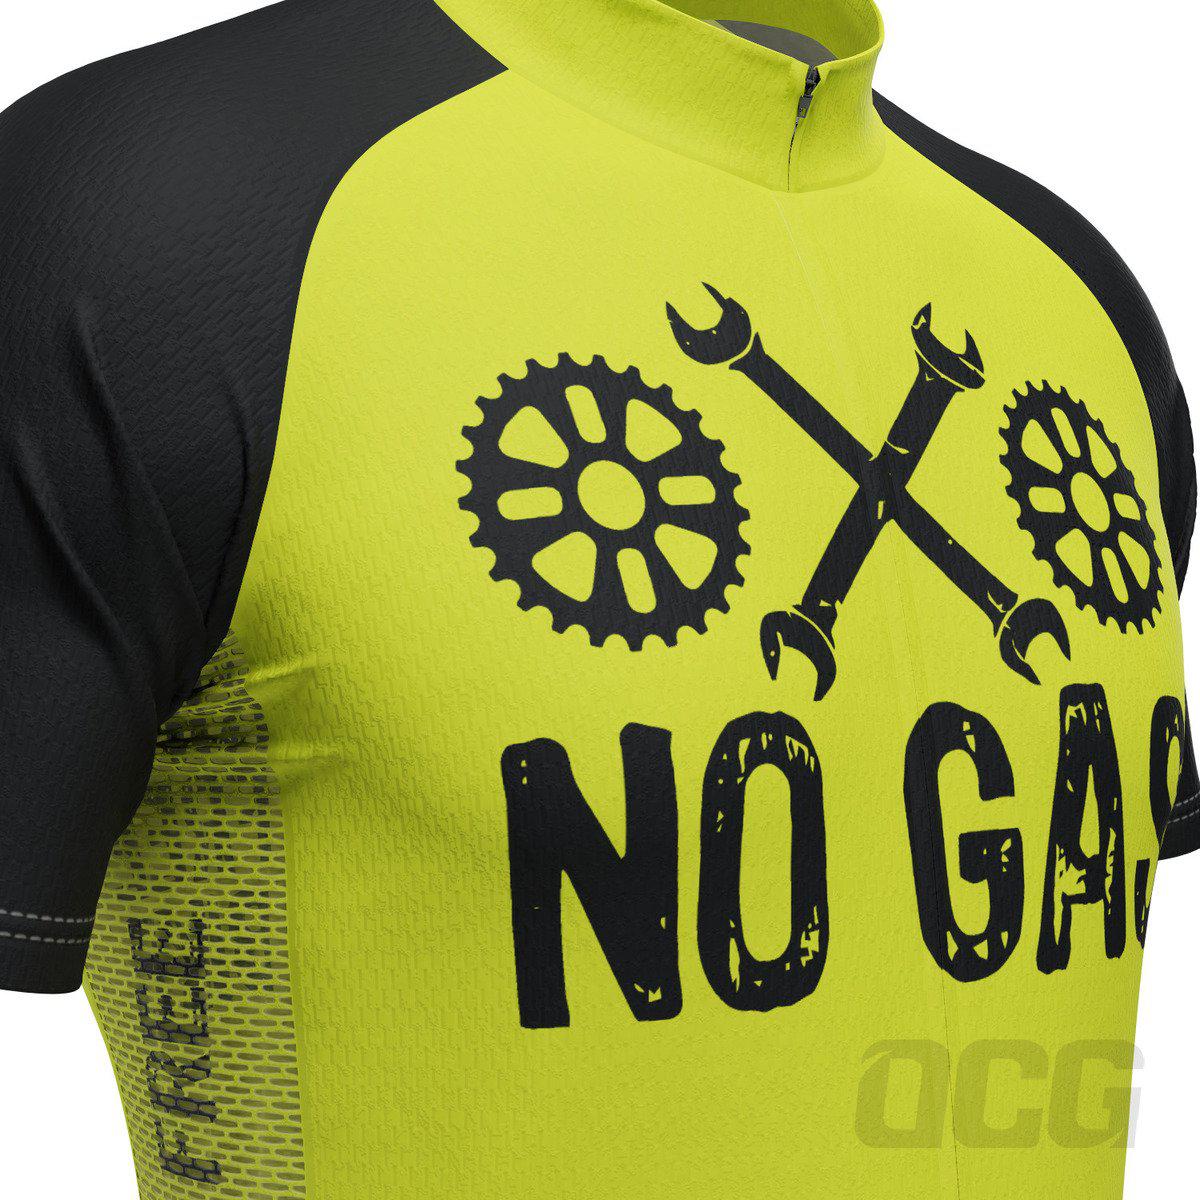 Men's No Gas Pollution Free Short Sleeve Cycling Kit